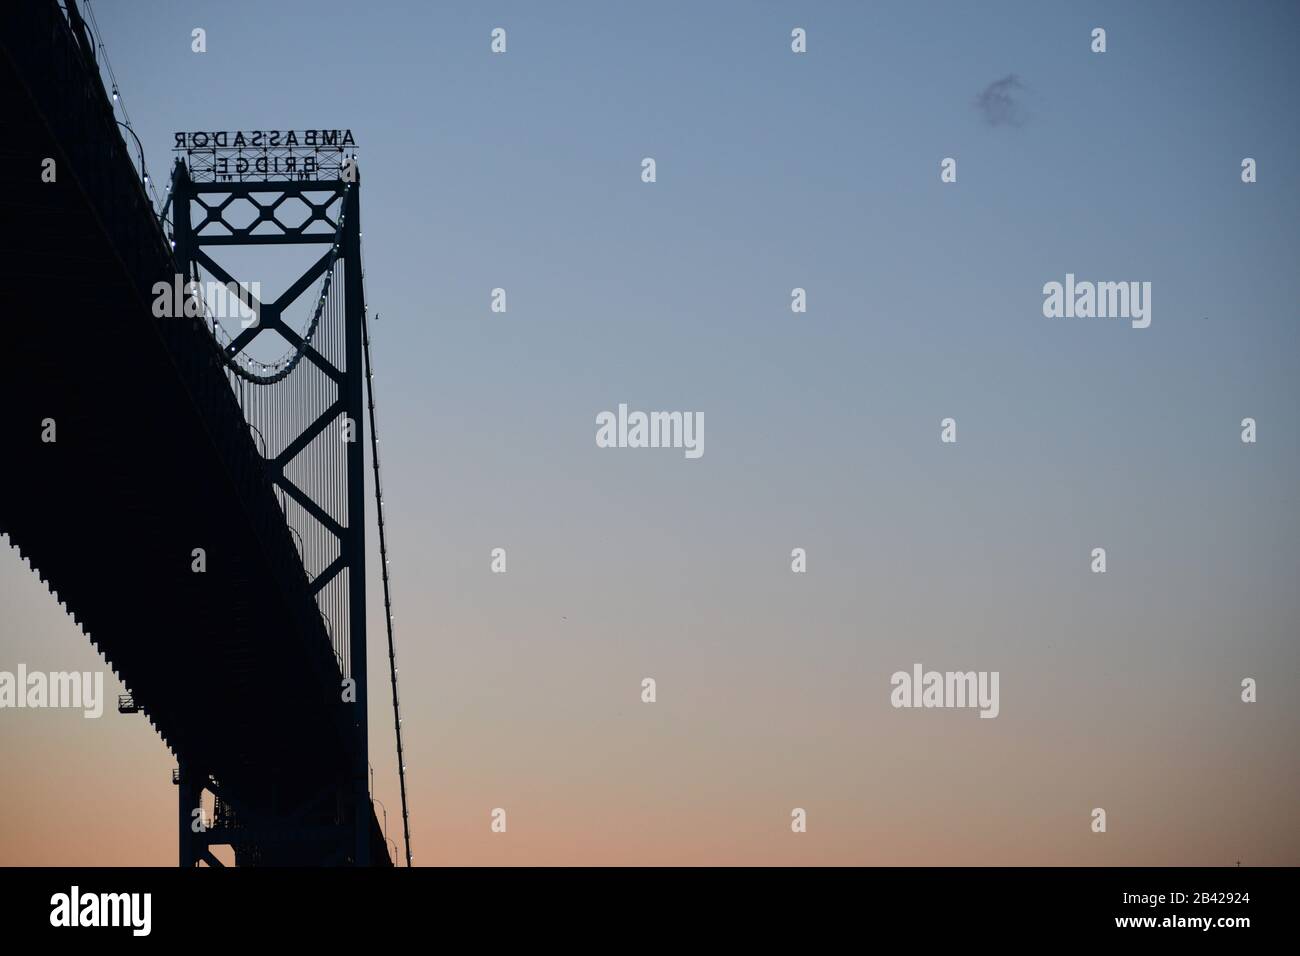 Ambassador bridge view from Windsor, Ontario. Detroit - Canada border crossing at sunset. Space for text in the sky. Stock Photo